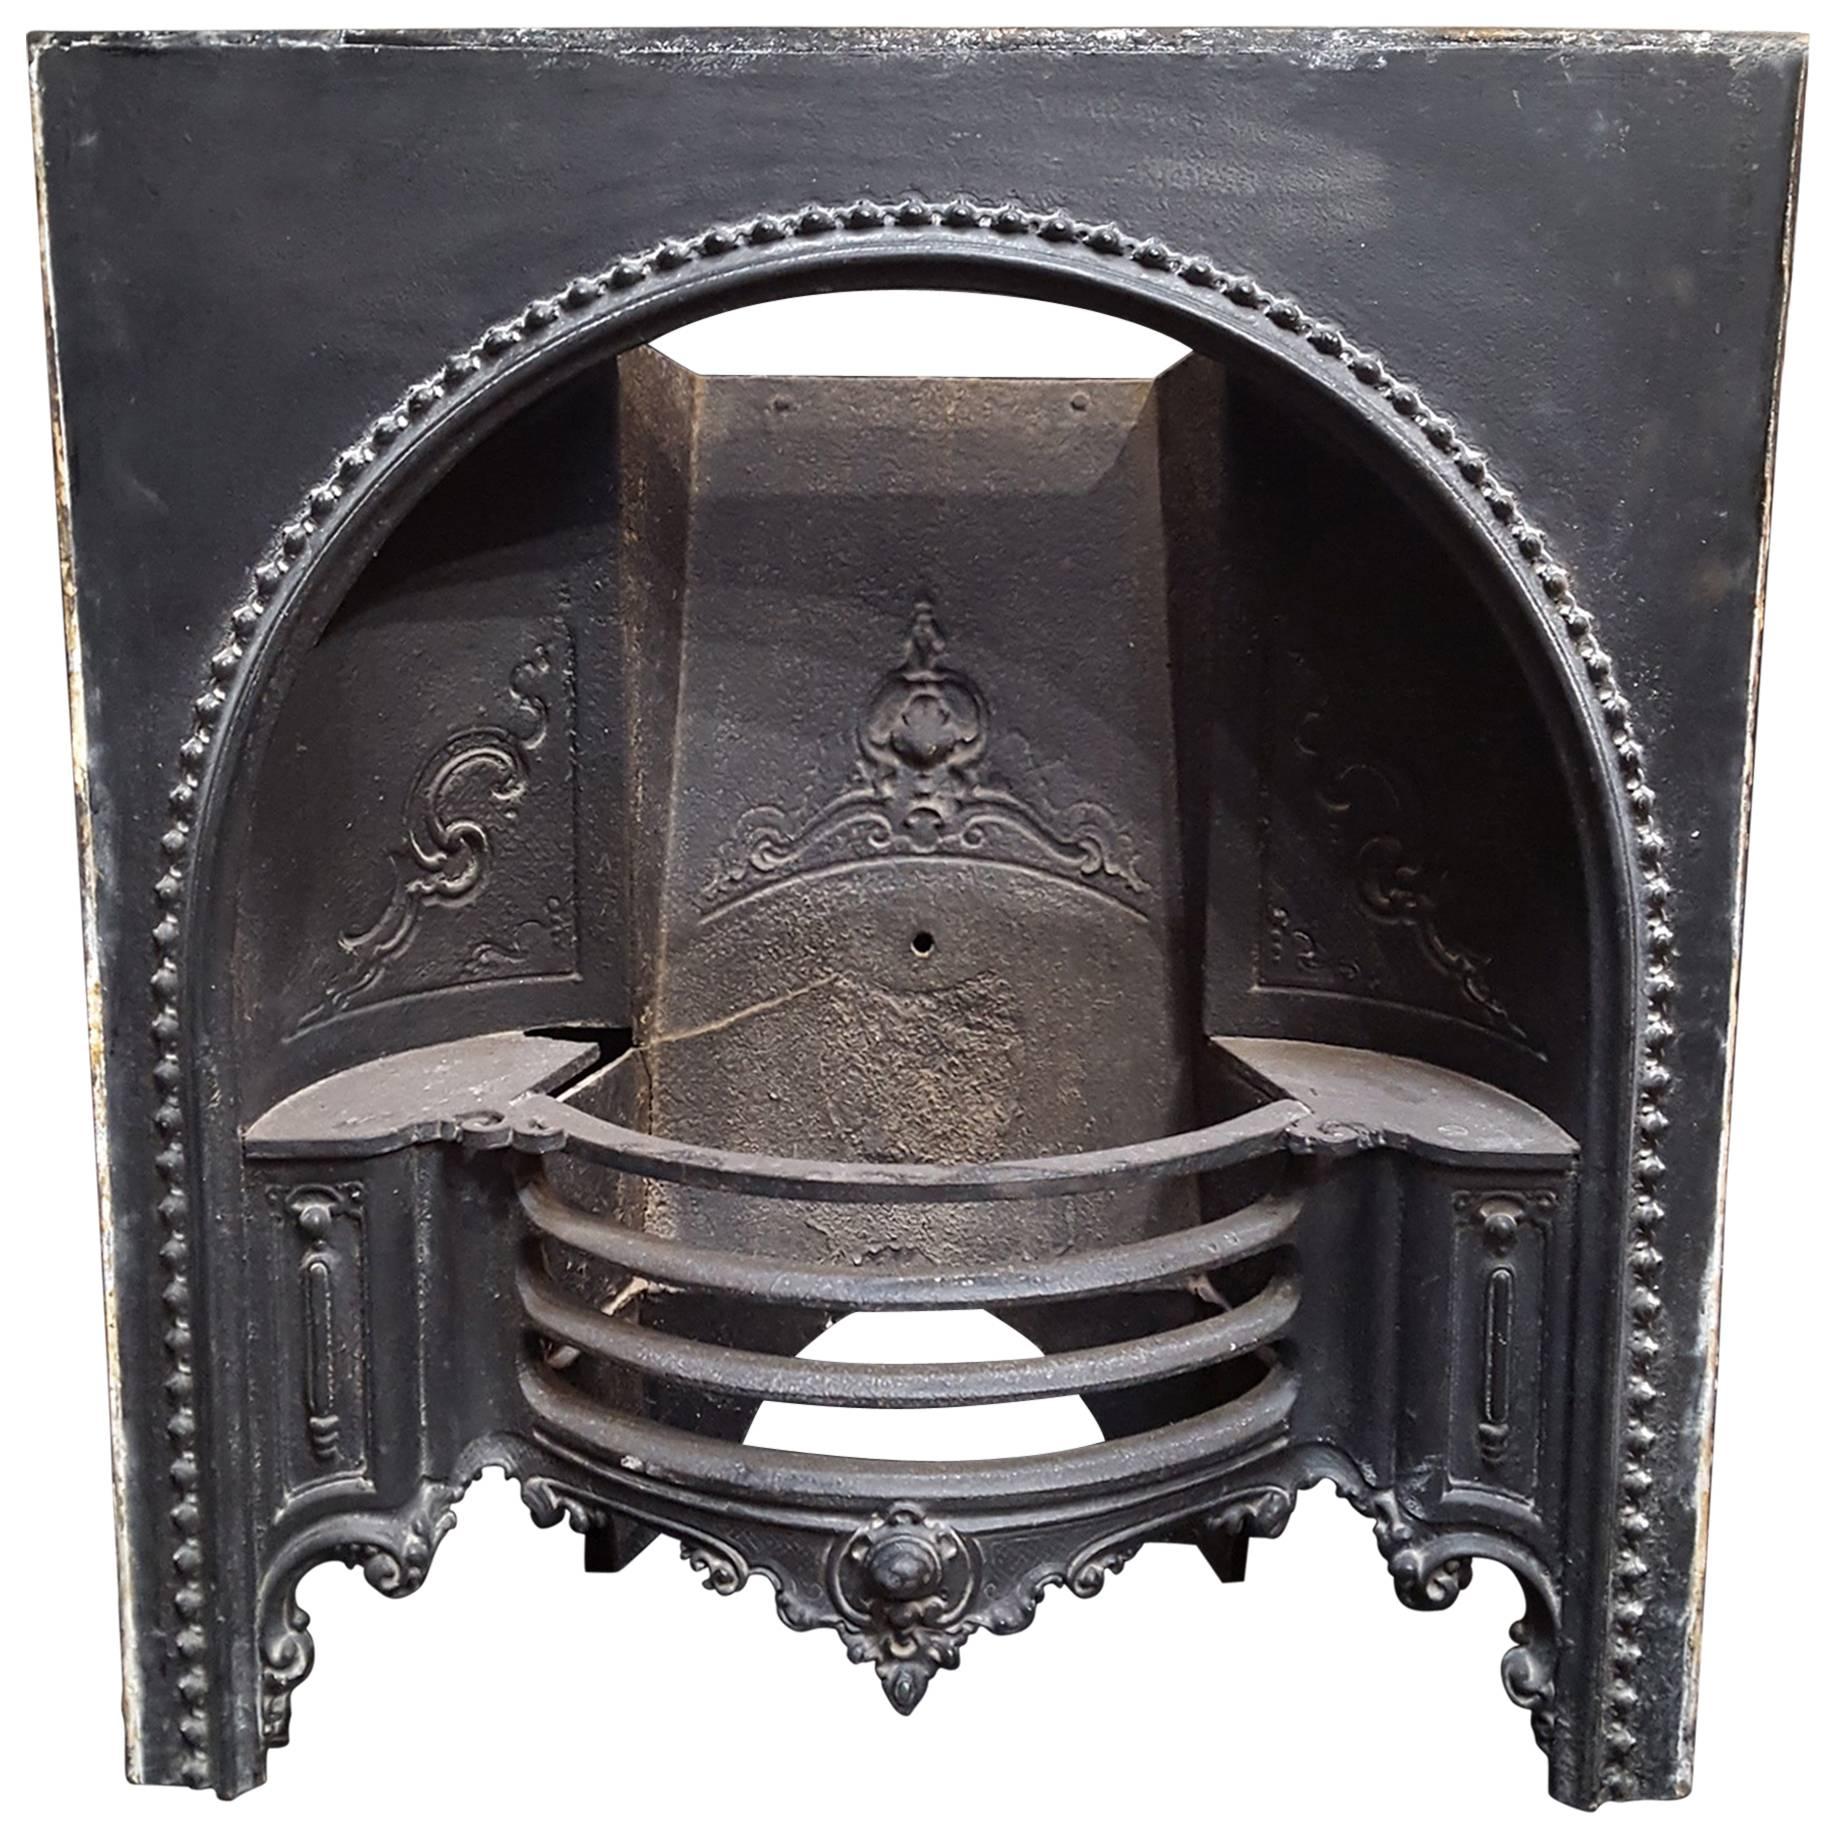 Original Cast Iron English Fireplace, Early Victorian Hob Grate For Sale